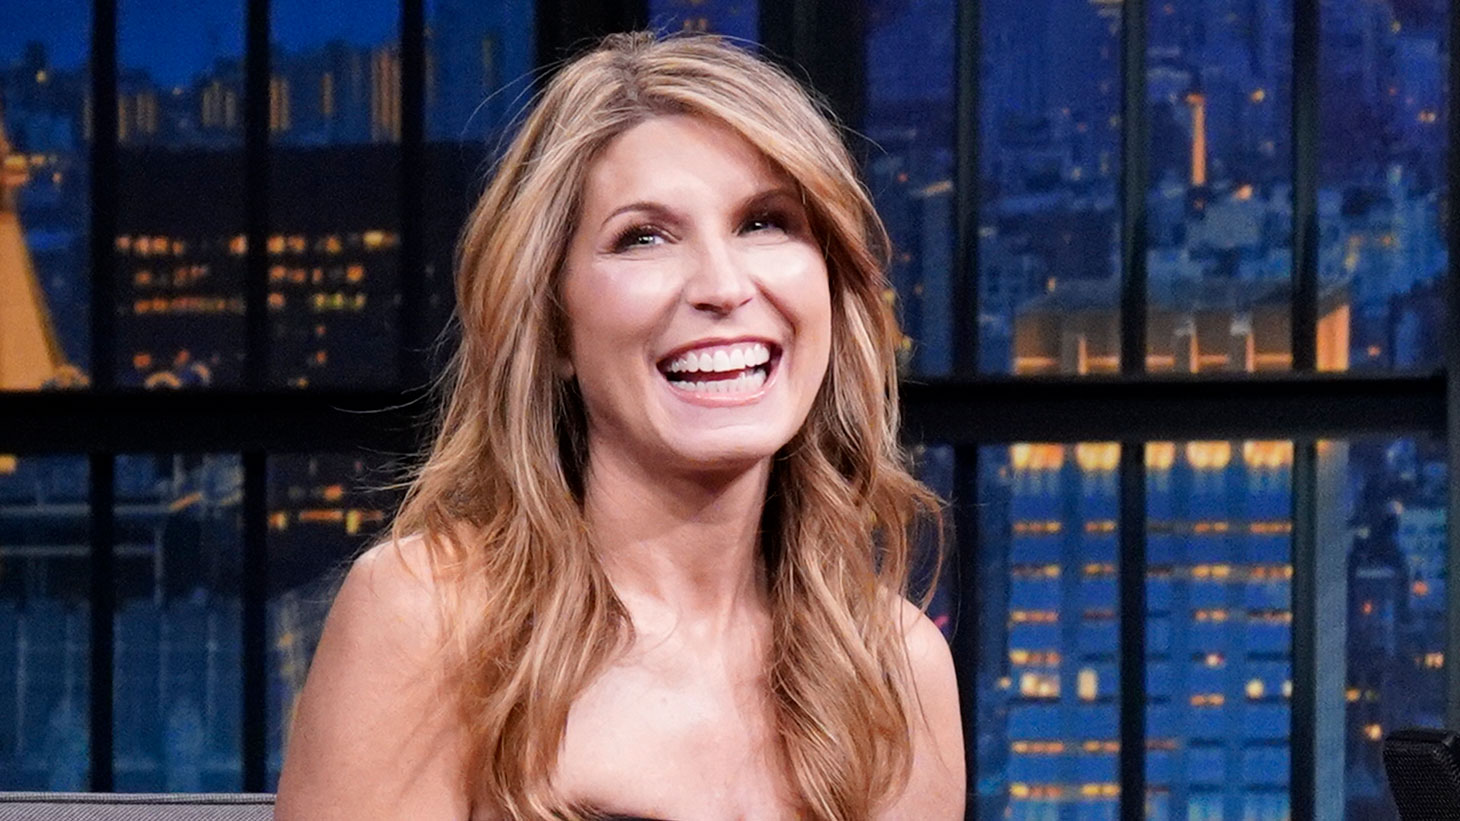 Watch Late Night with Seth Meyers interview 'Nicolle Wallace on Coveri...